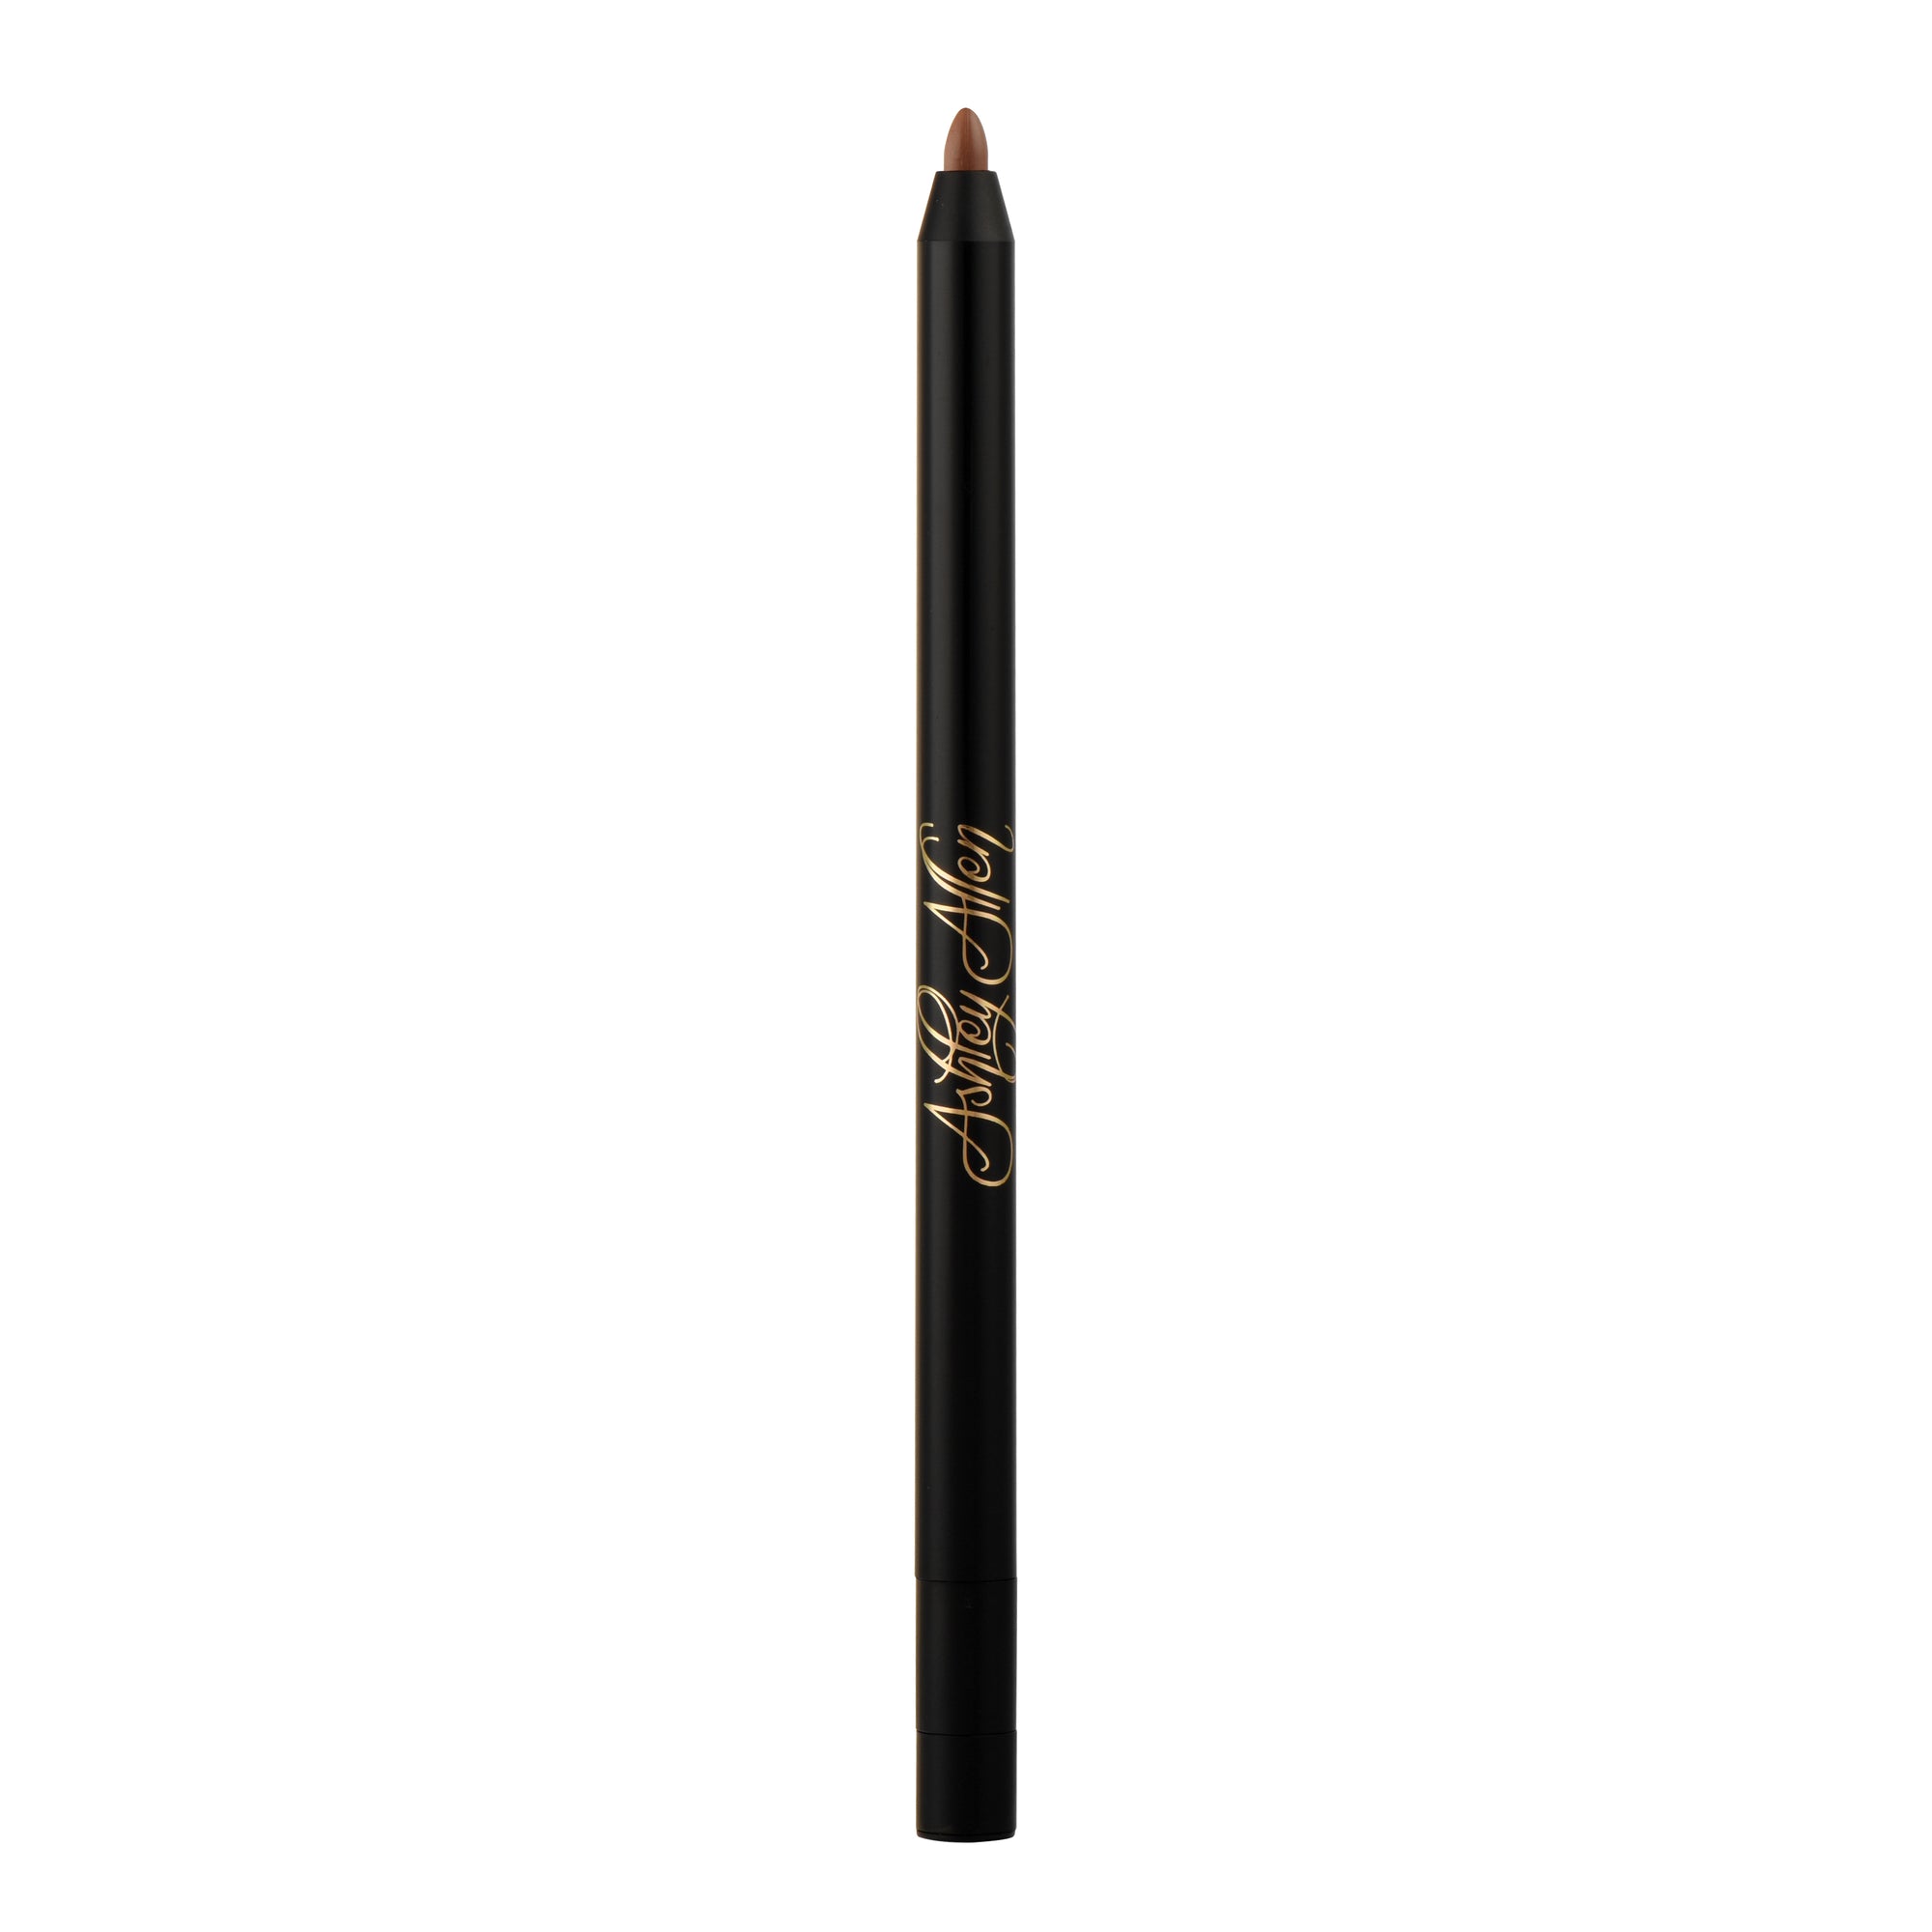 Lip Liner N004 (50% OFF) will be $11.00 activated at checkout